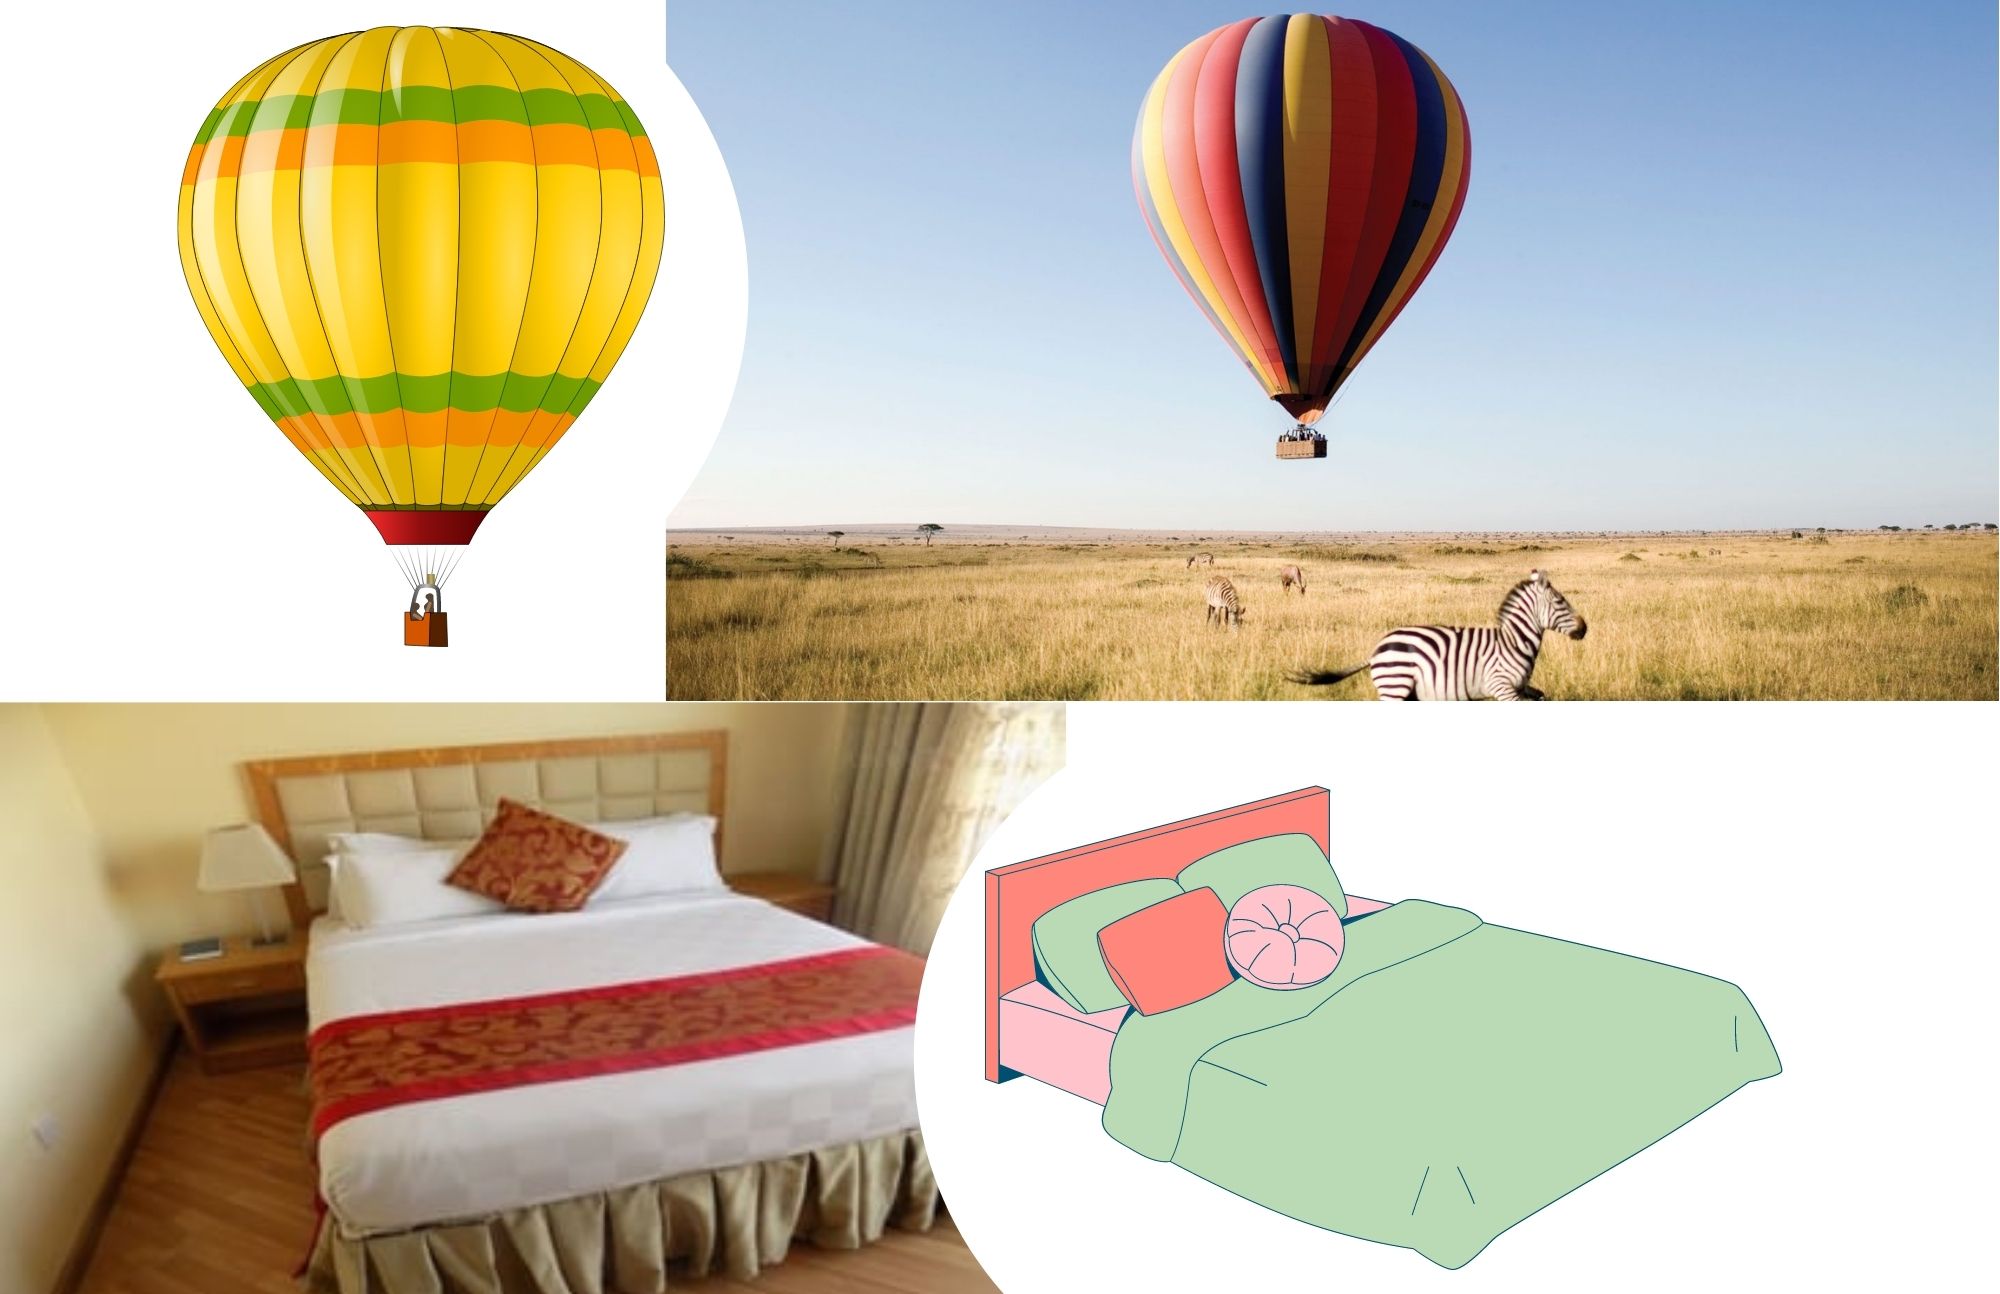 Photograph of a hot air balloon and a bed with their artwork version